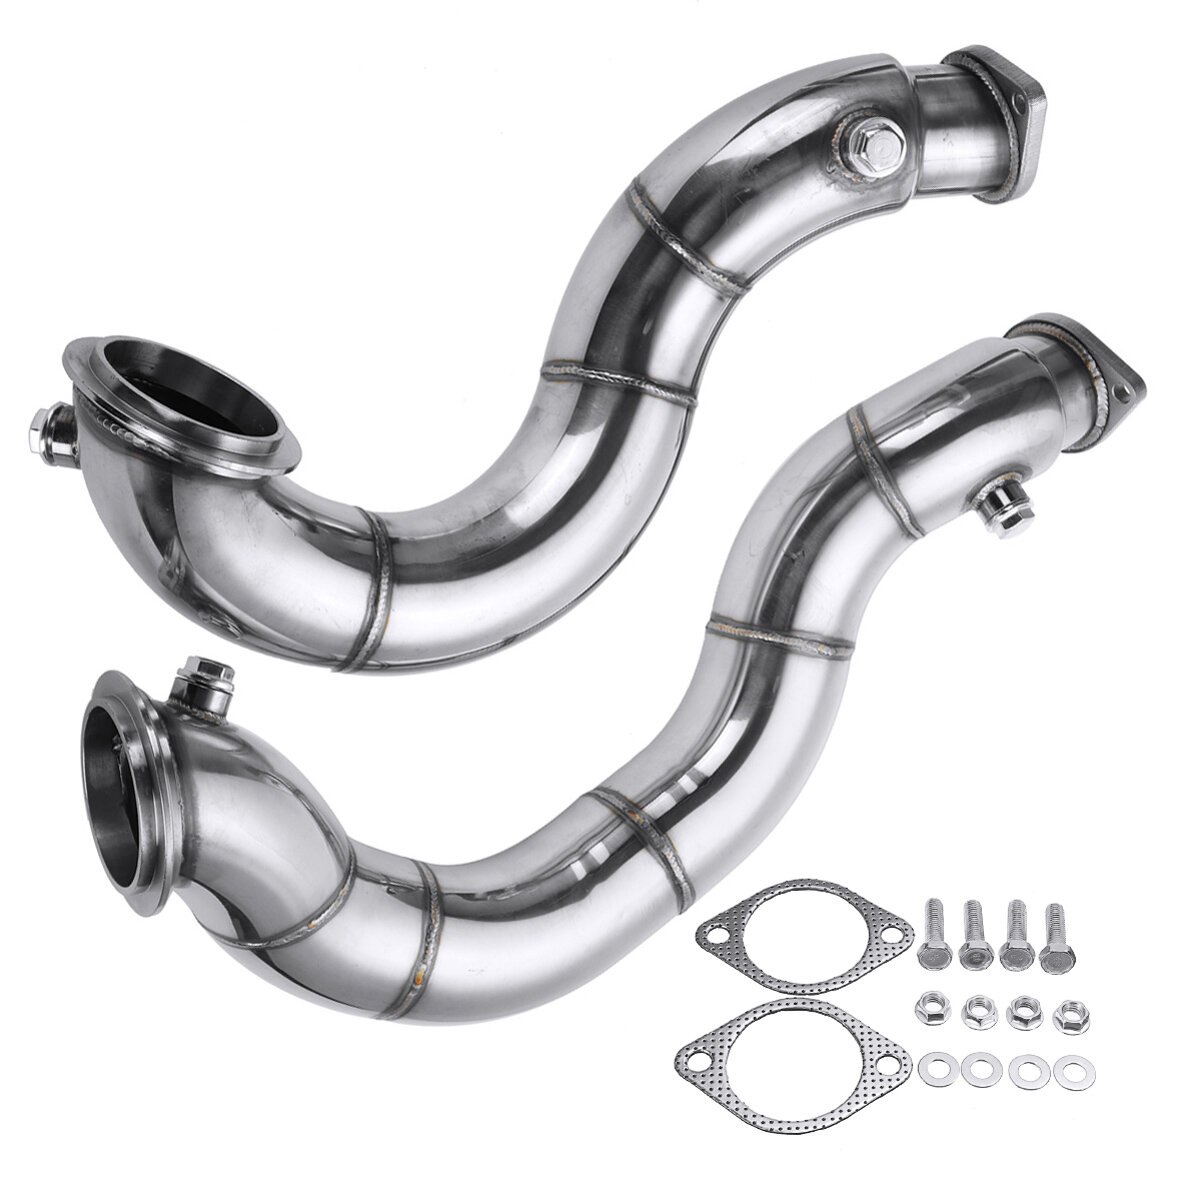 

Stainless Steel Exhaust Pipe Muffler Decat Downpipe for BMW N54 E90 E91 E92 E93 E82 135i 335i Twin Turbo 2007 2008 2009